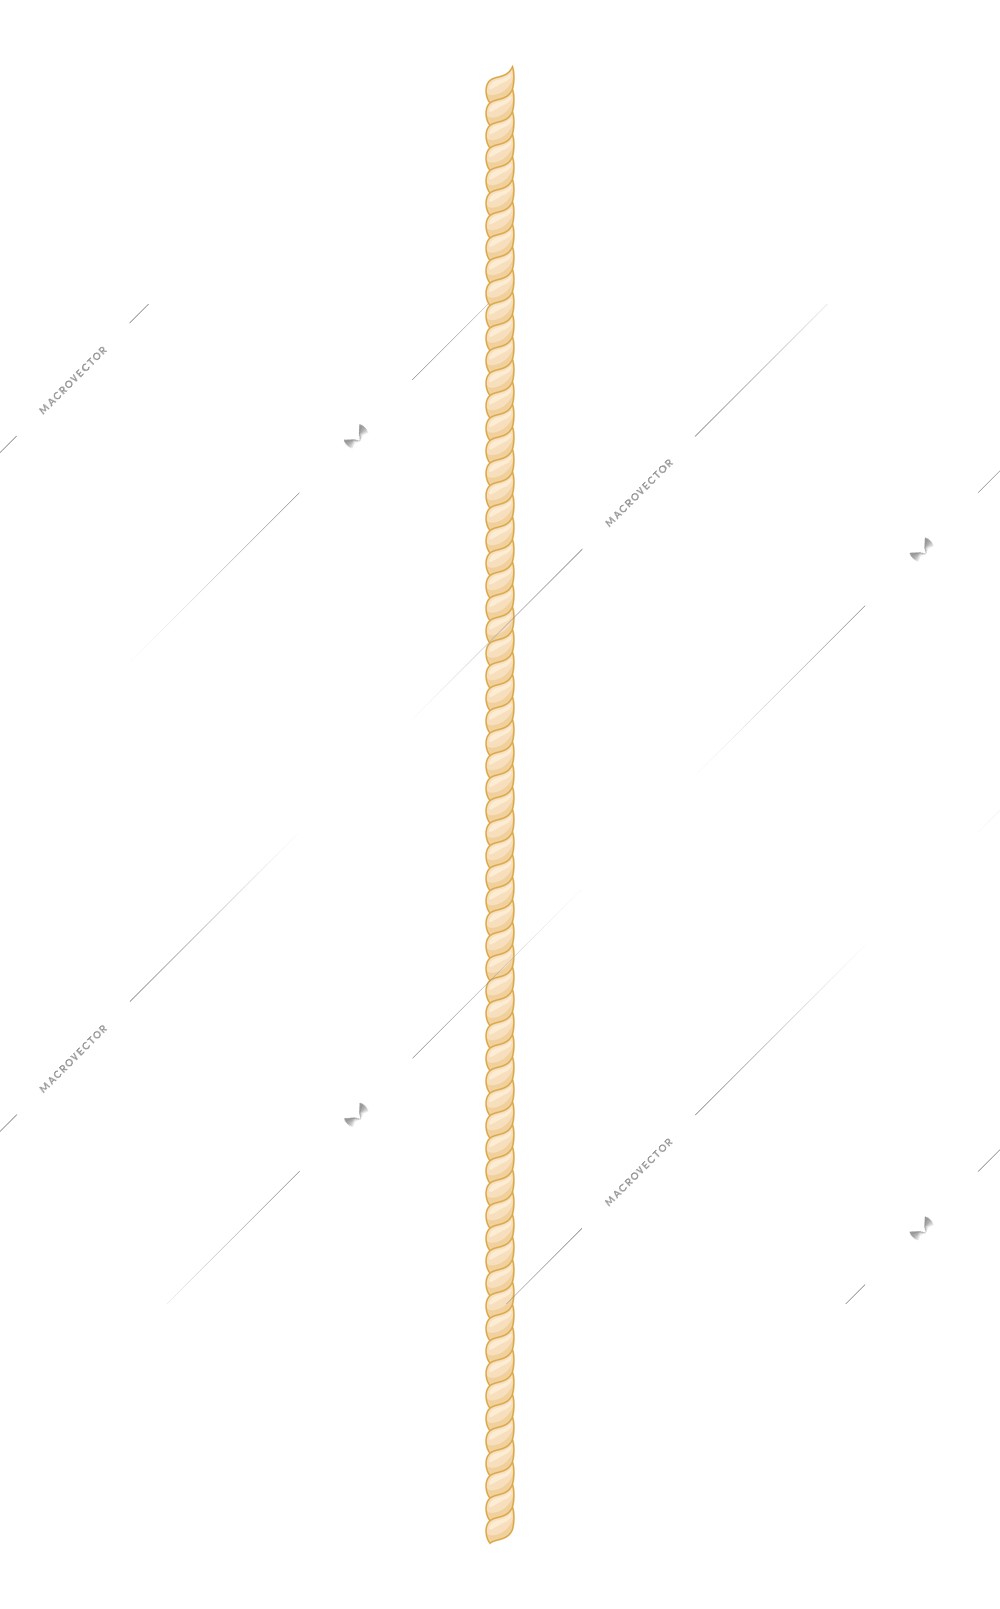 Realistic vertical thin leather belt on white background vector illustration